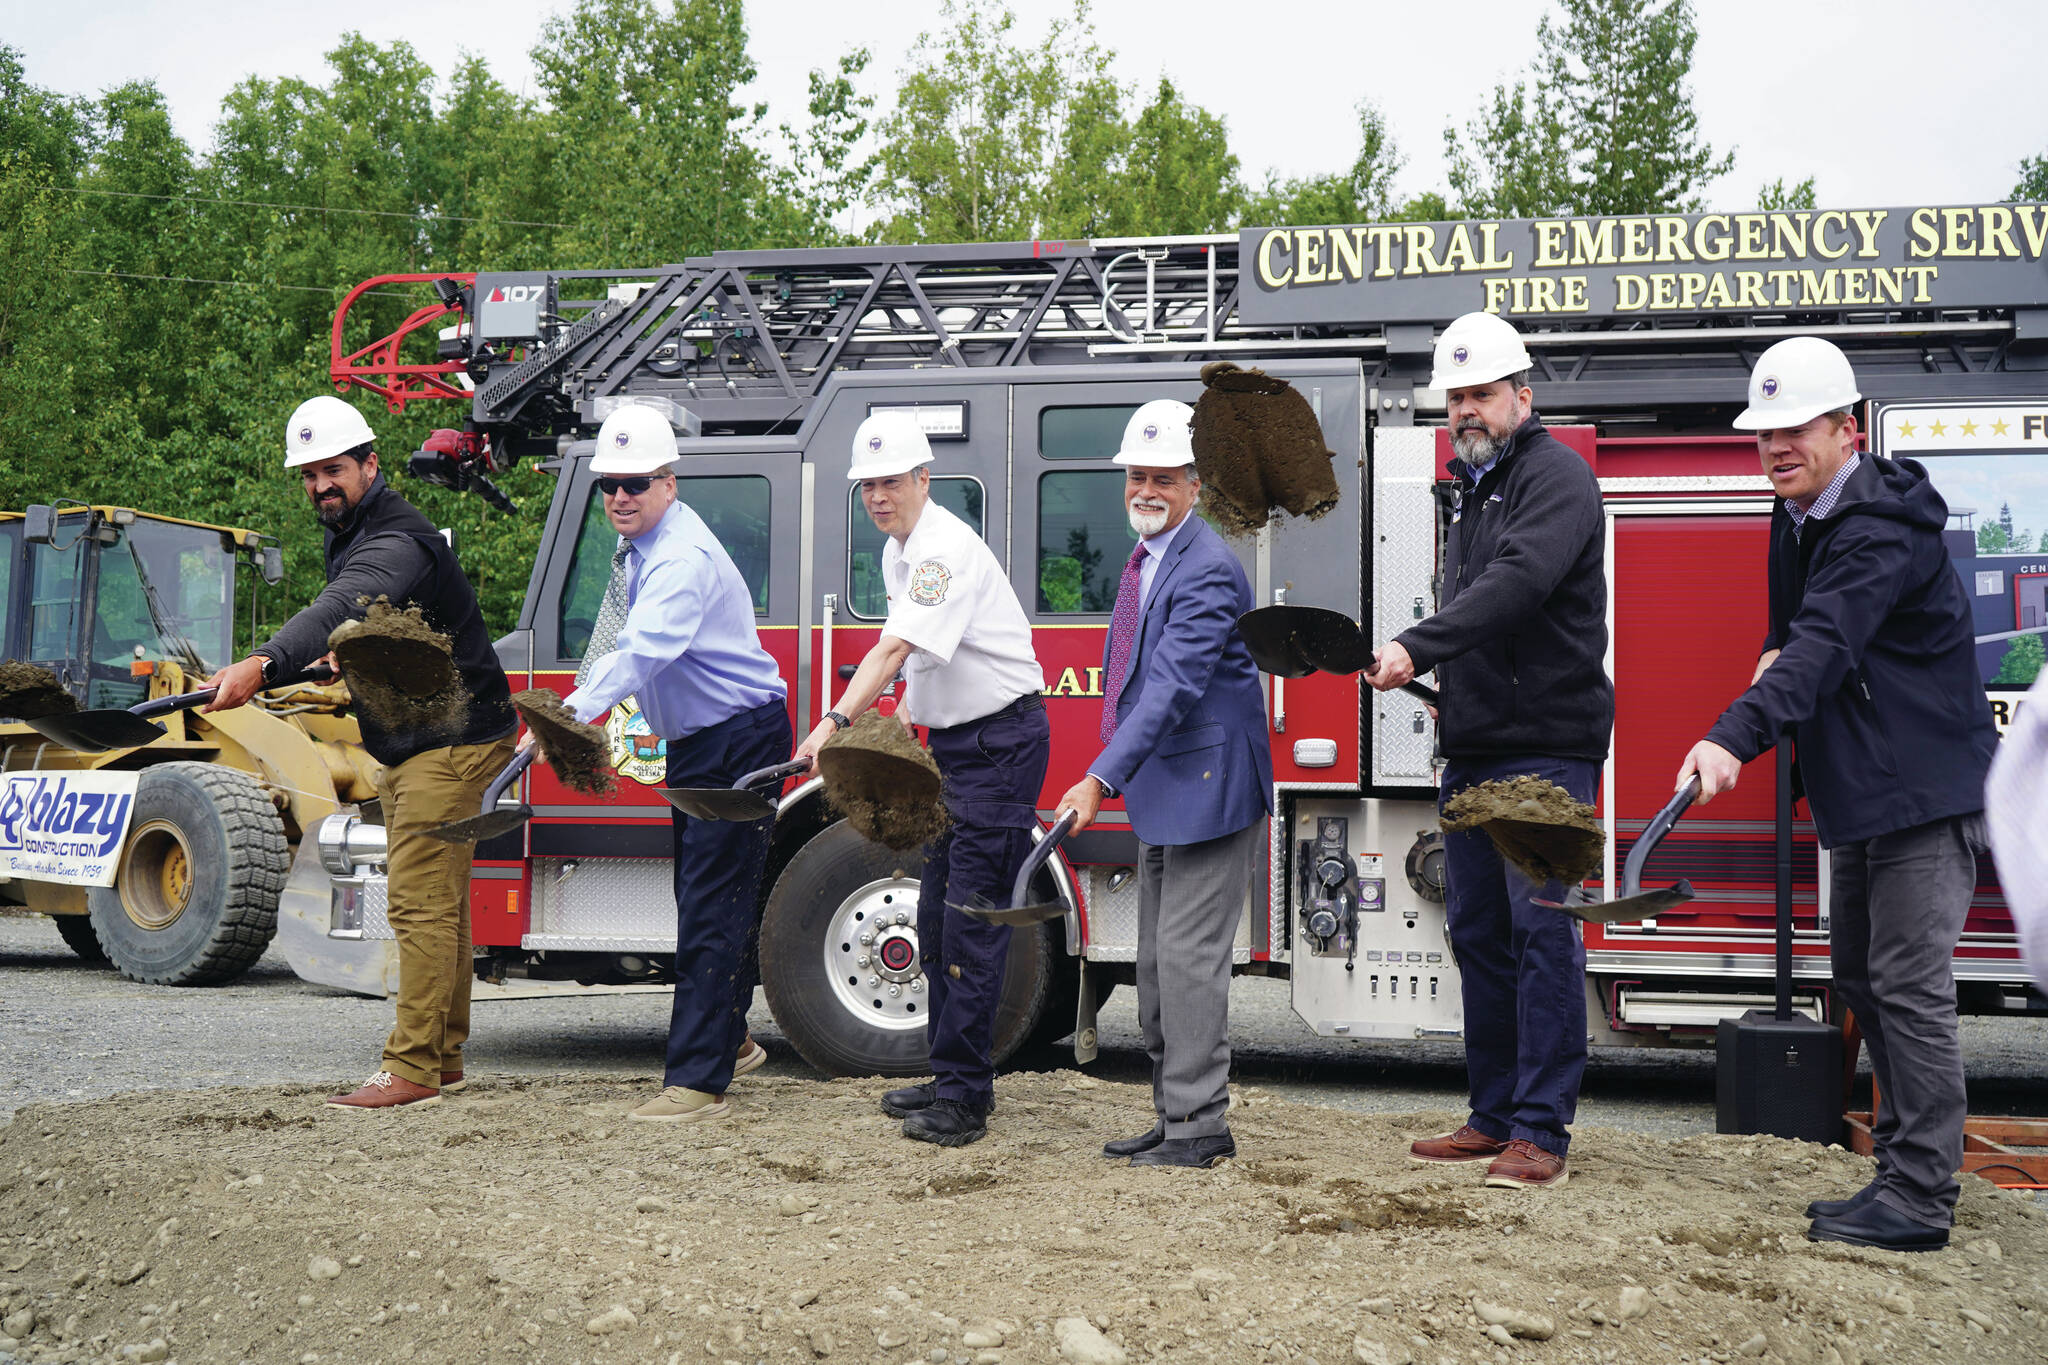 Jake Dye/Peninsula Clarion
Central Emergency Services Chief Roy Browning and other dignitaries toss dirt into the air at a groundbreaking for the new Central Emergency Services Station 1 in Soldotna on Wednesday.